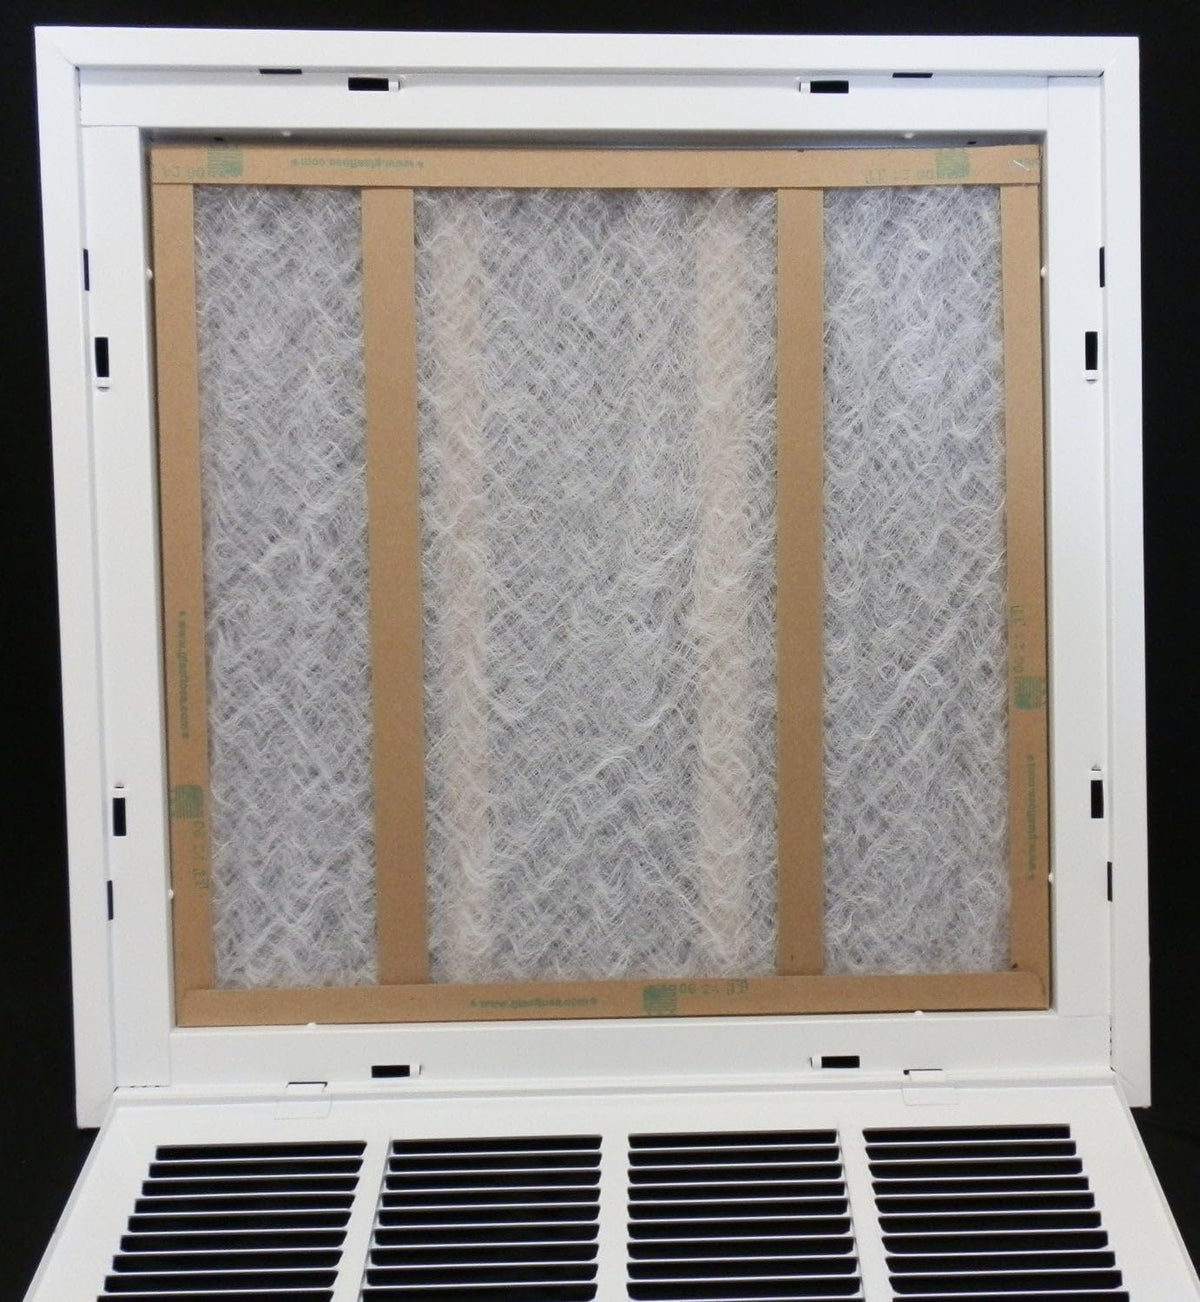 20&quot; X 36&quot; Steel Return Air Filter Grille for 1&quot; Filter - Fixed Hinged - [Outer Dimensions: 22 5/8&quot; X 38 5/8&quot;]